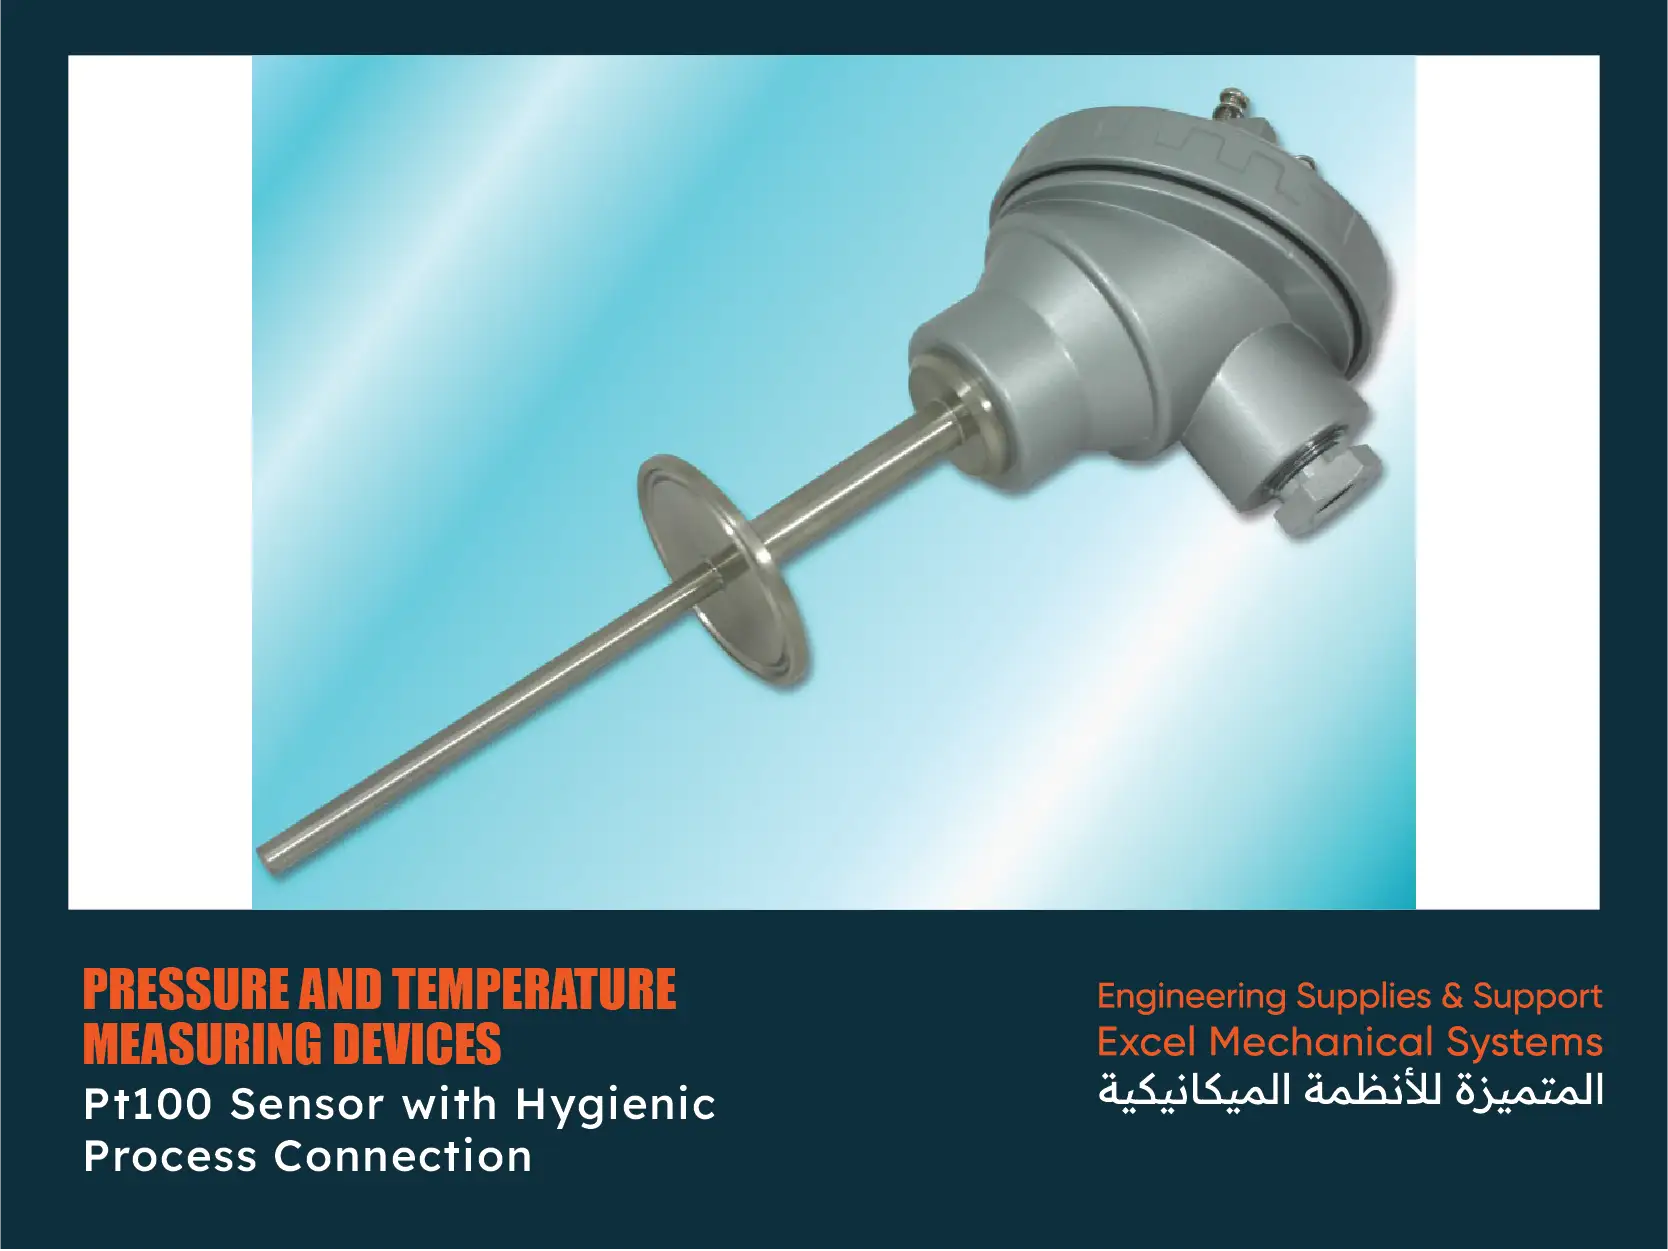 Pt100 Sensor with Hygienic Process Connection